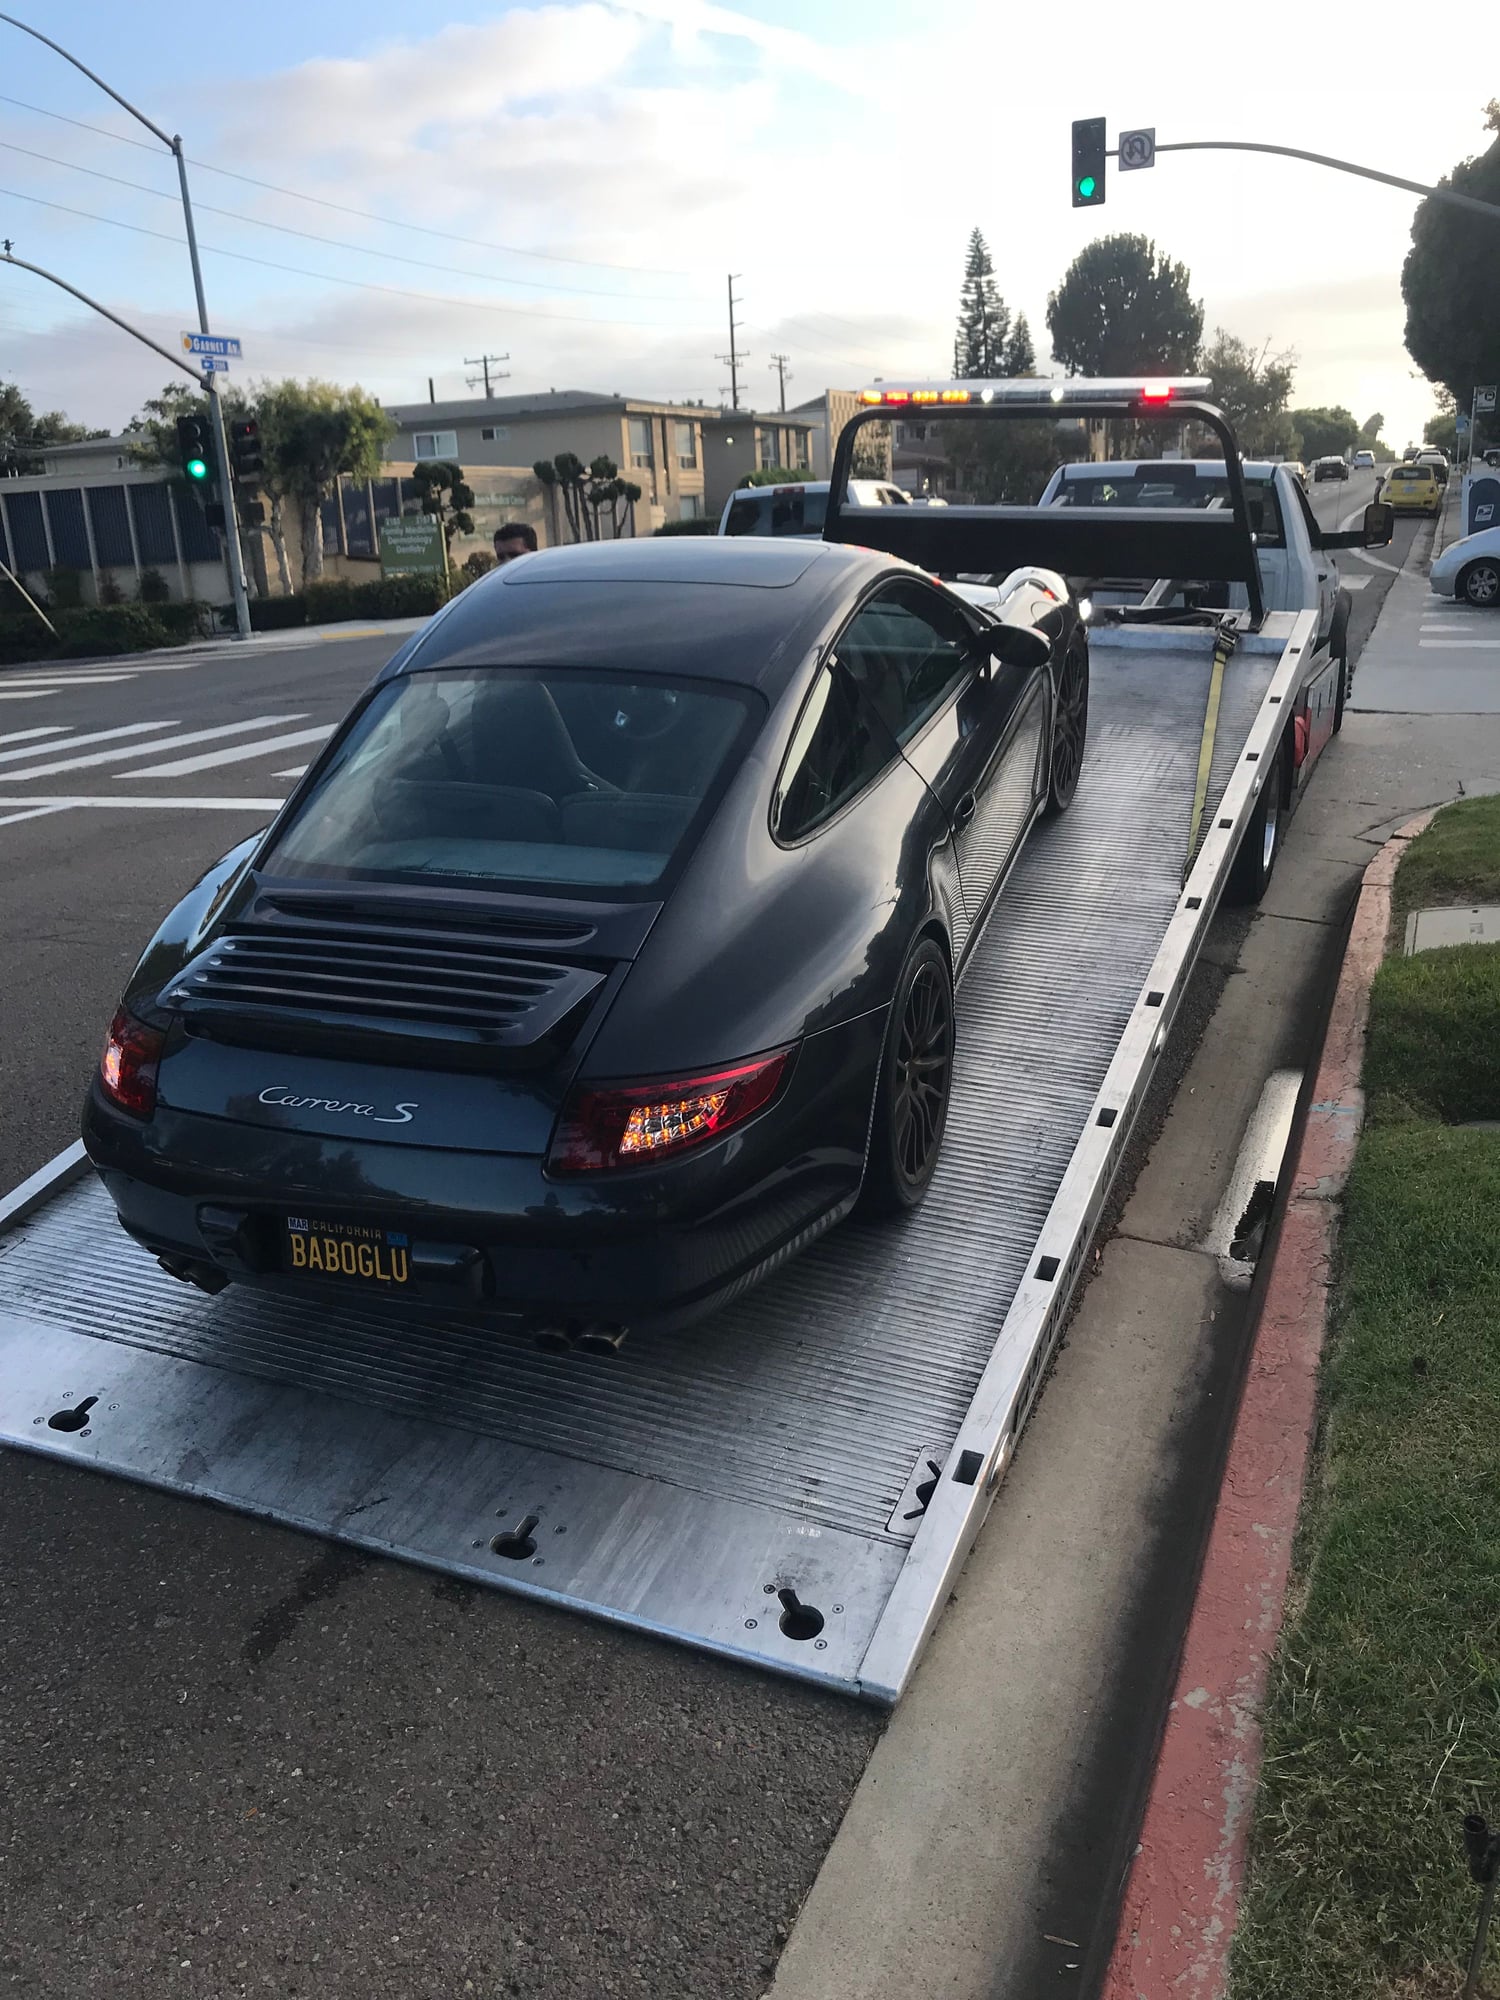 2007 Porsche 911 - 2007 Porsche 911 (997.1) S - WAS almost track ready (Cylinder Scoring) AS IS - Used - VIN WP0AB299X7S731755 - 127,500 Miles - 6 cyl - 2WD - Manual - Coupe - Gray - San Diego, CA 92109, United States